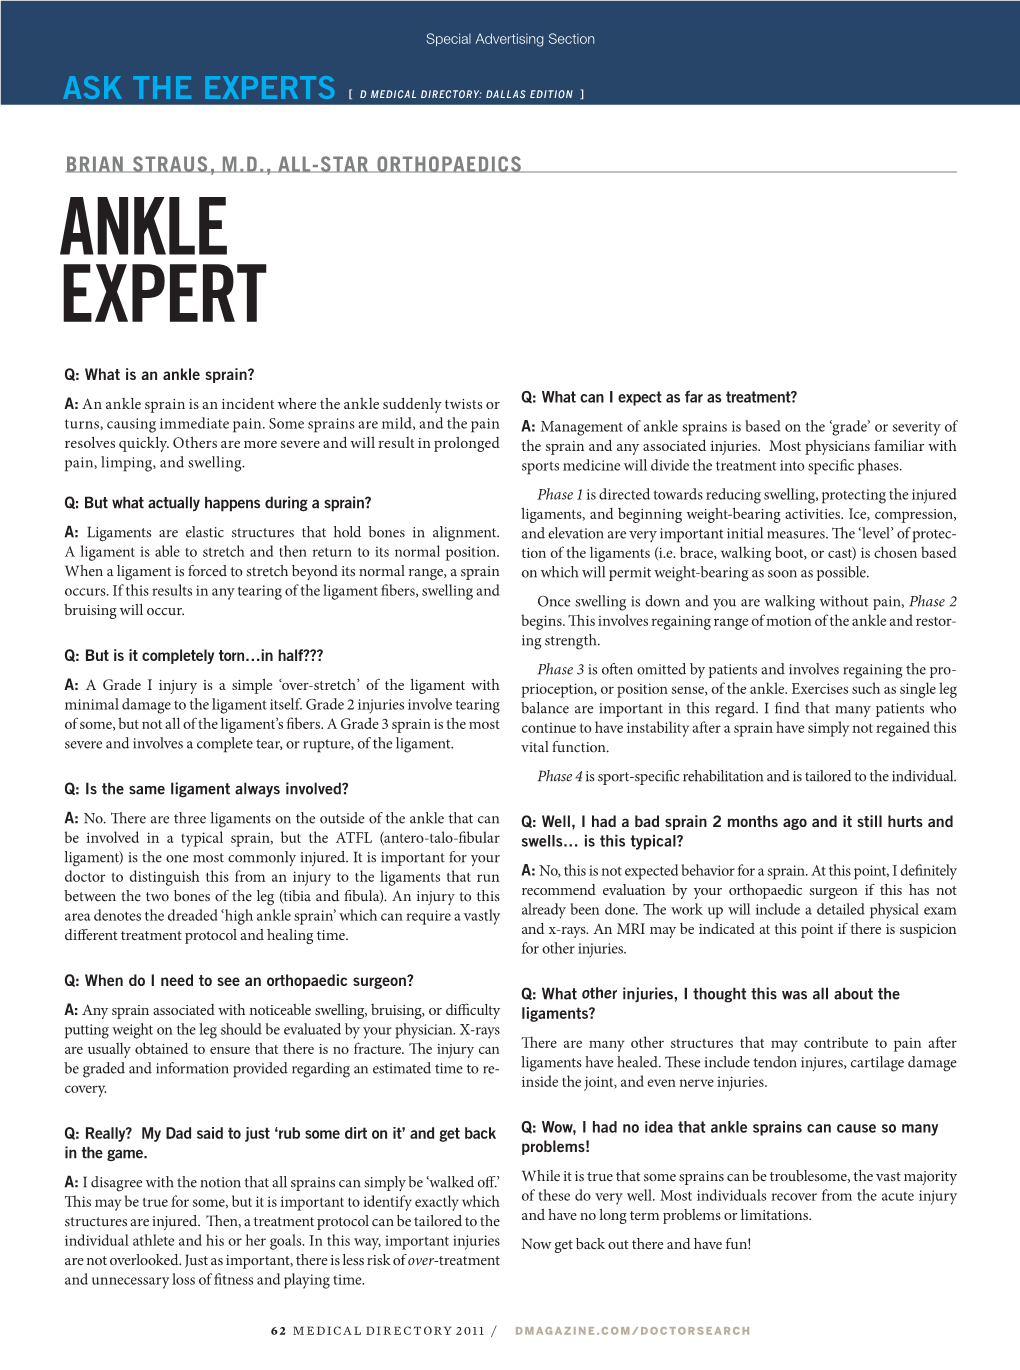 ANKLE Expert